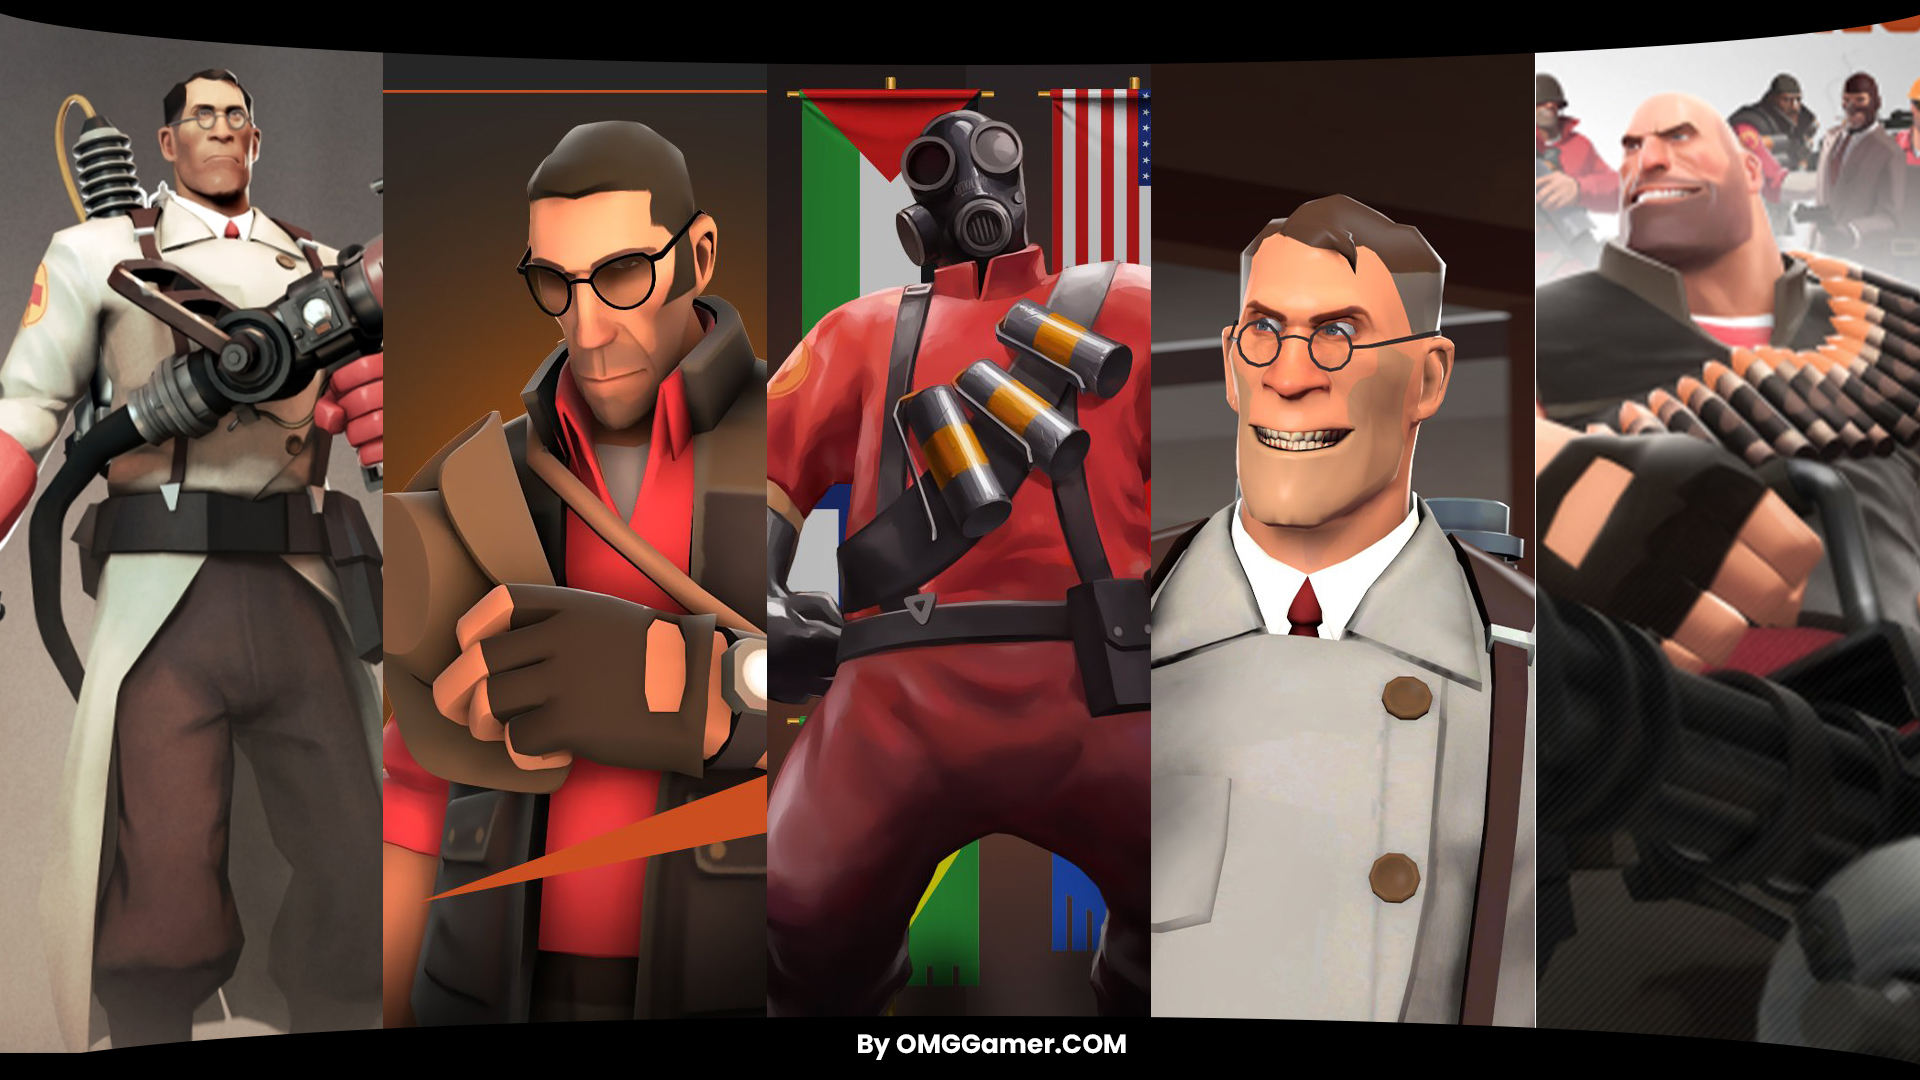 Team Fortress 2: Games Like Overwatch